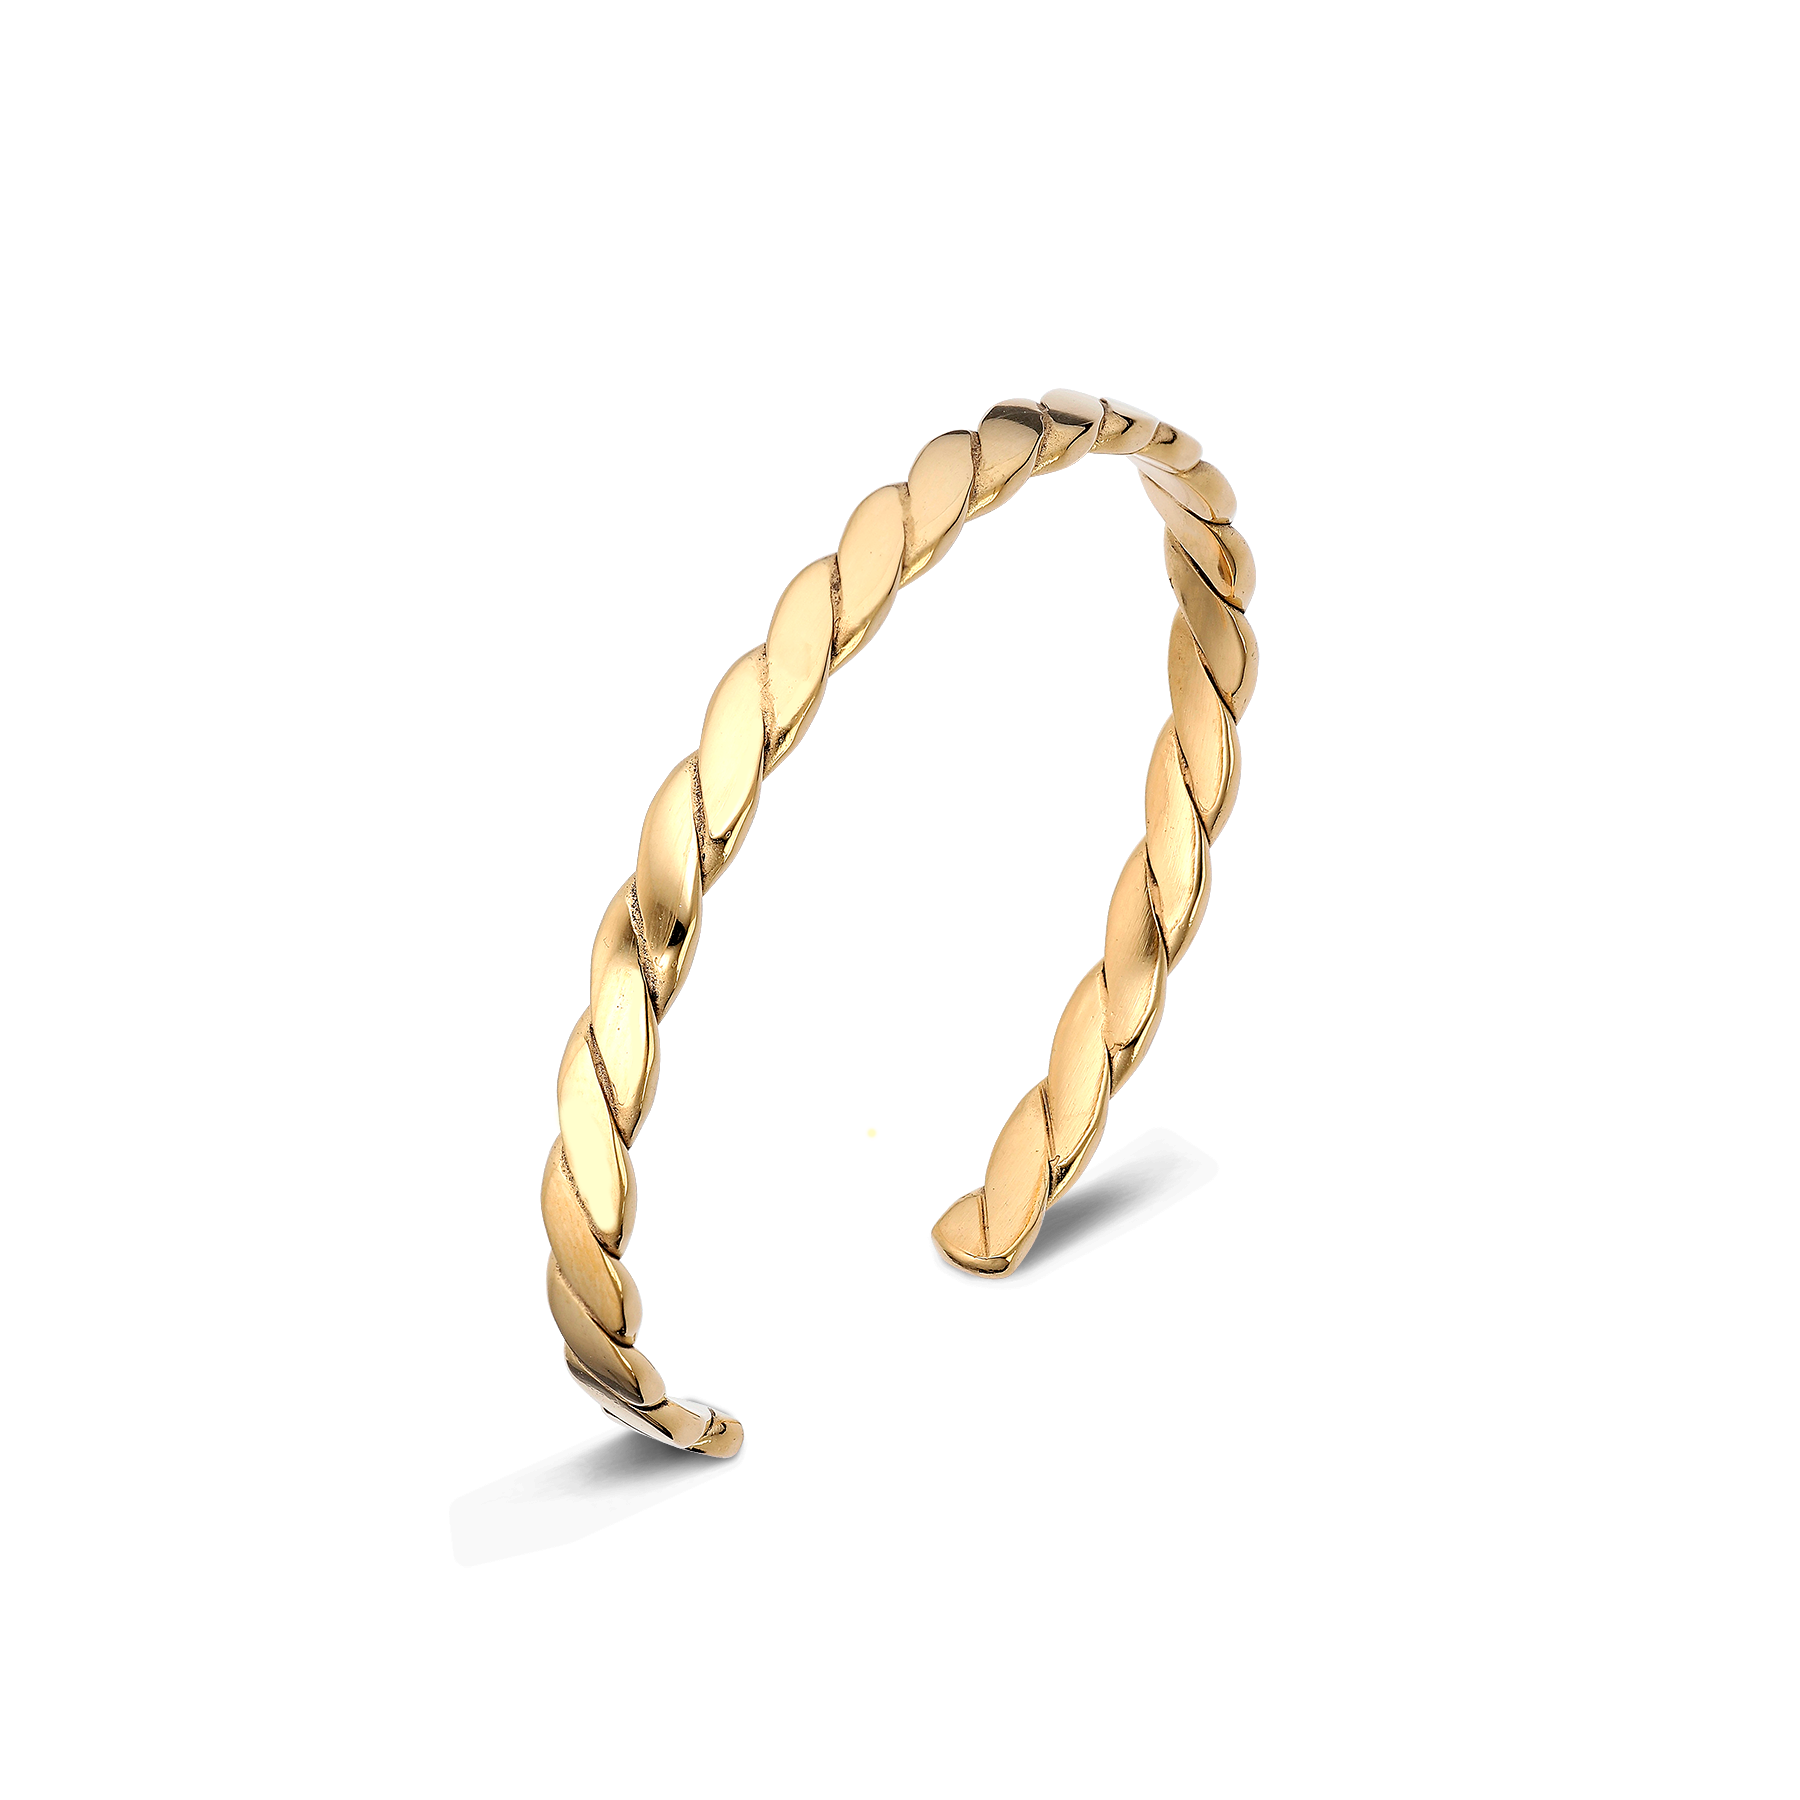 Bangle Flat Twisted 24K Gold Plated Solid Sterling Silver 925 by Susan Brandt Jewelry 1